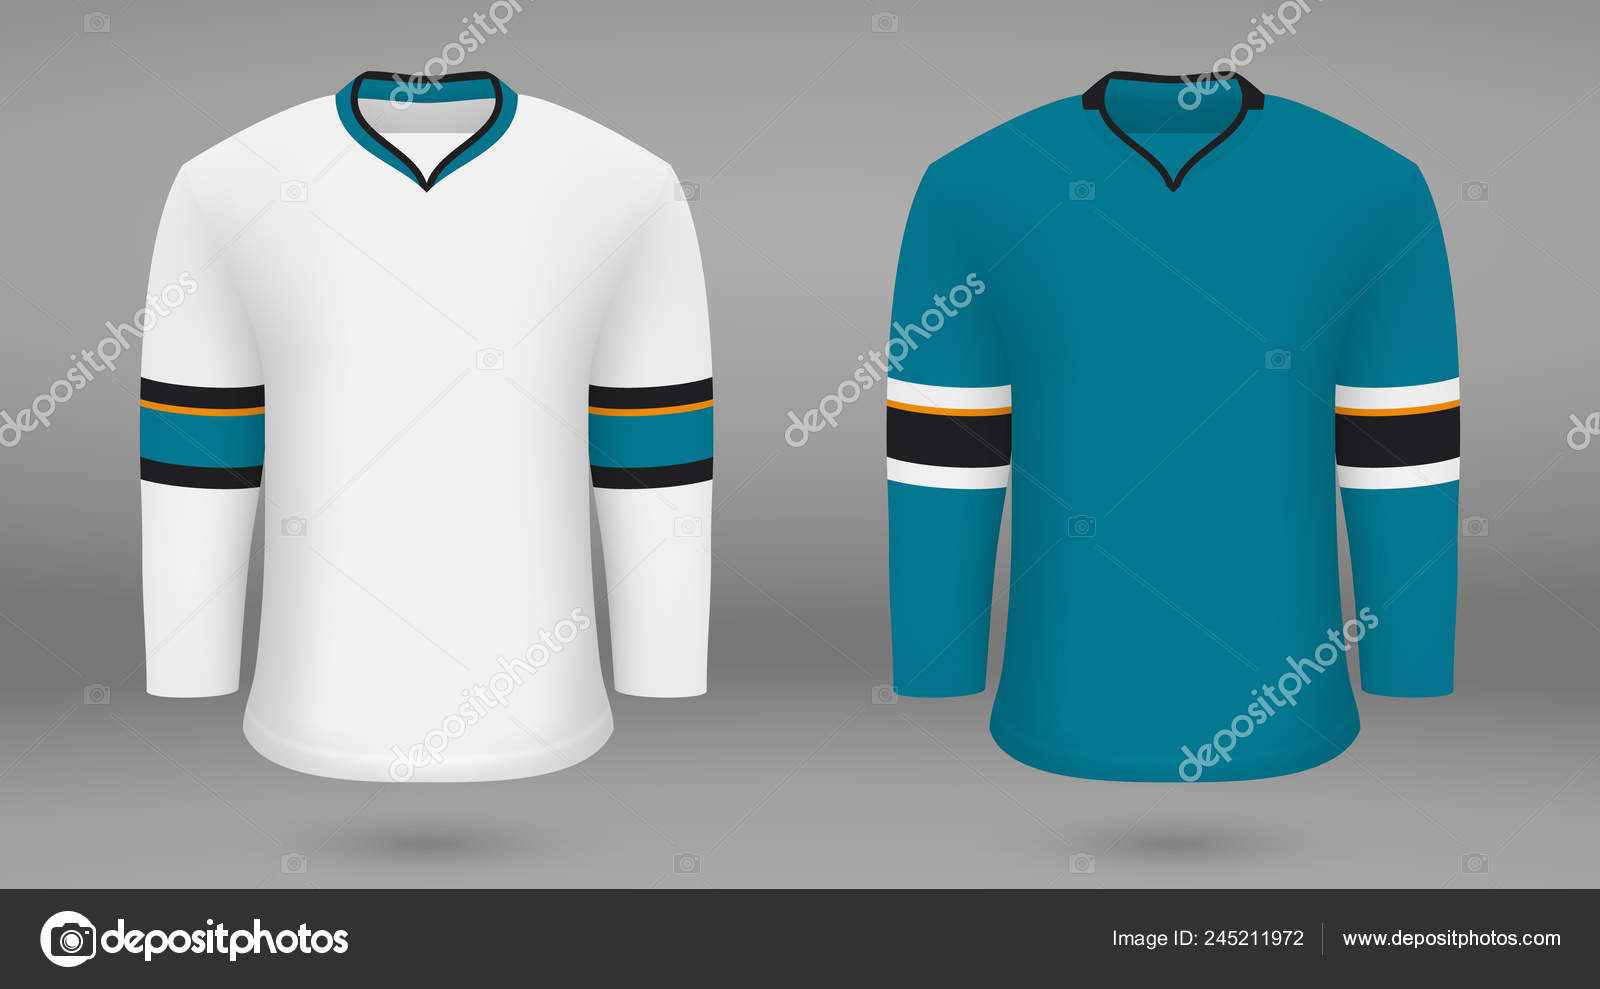 San Jose Sharks Vector Logo Isolated on Teel Background with